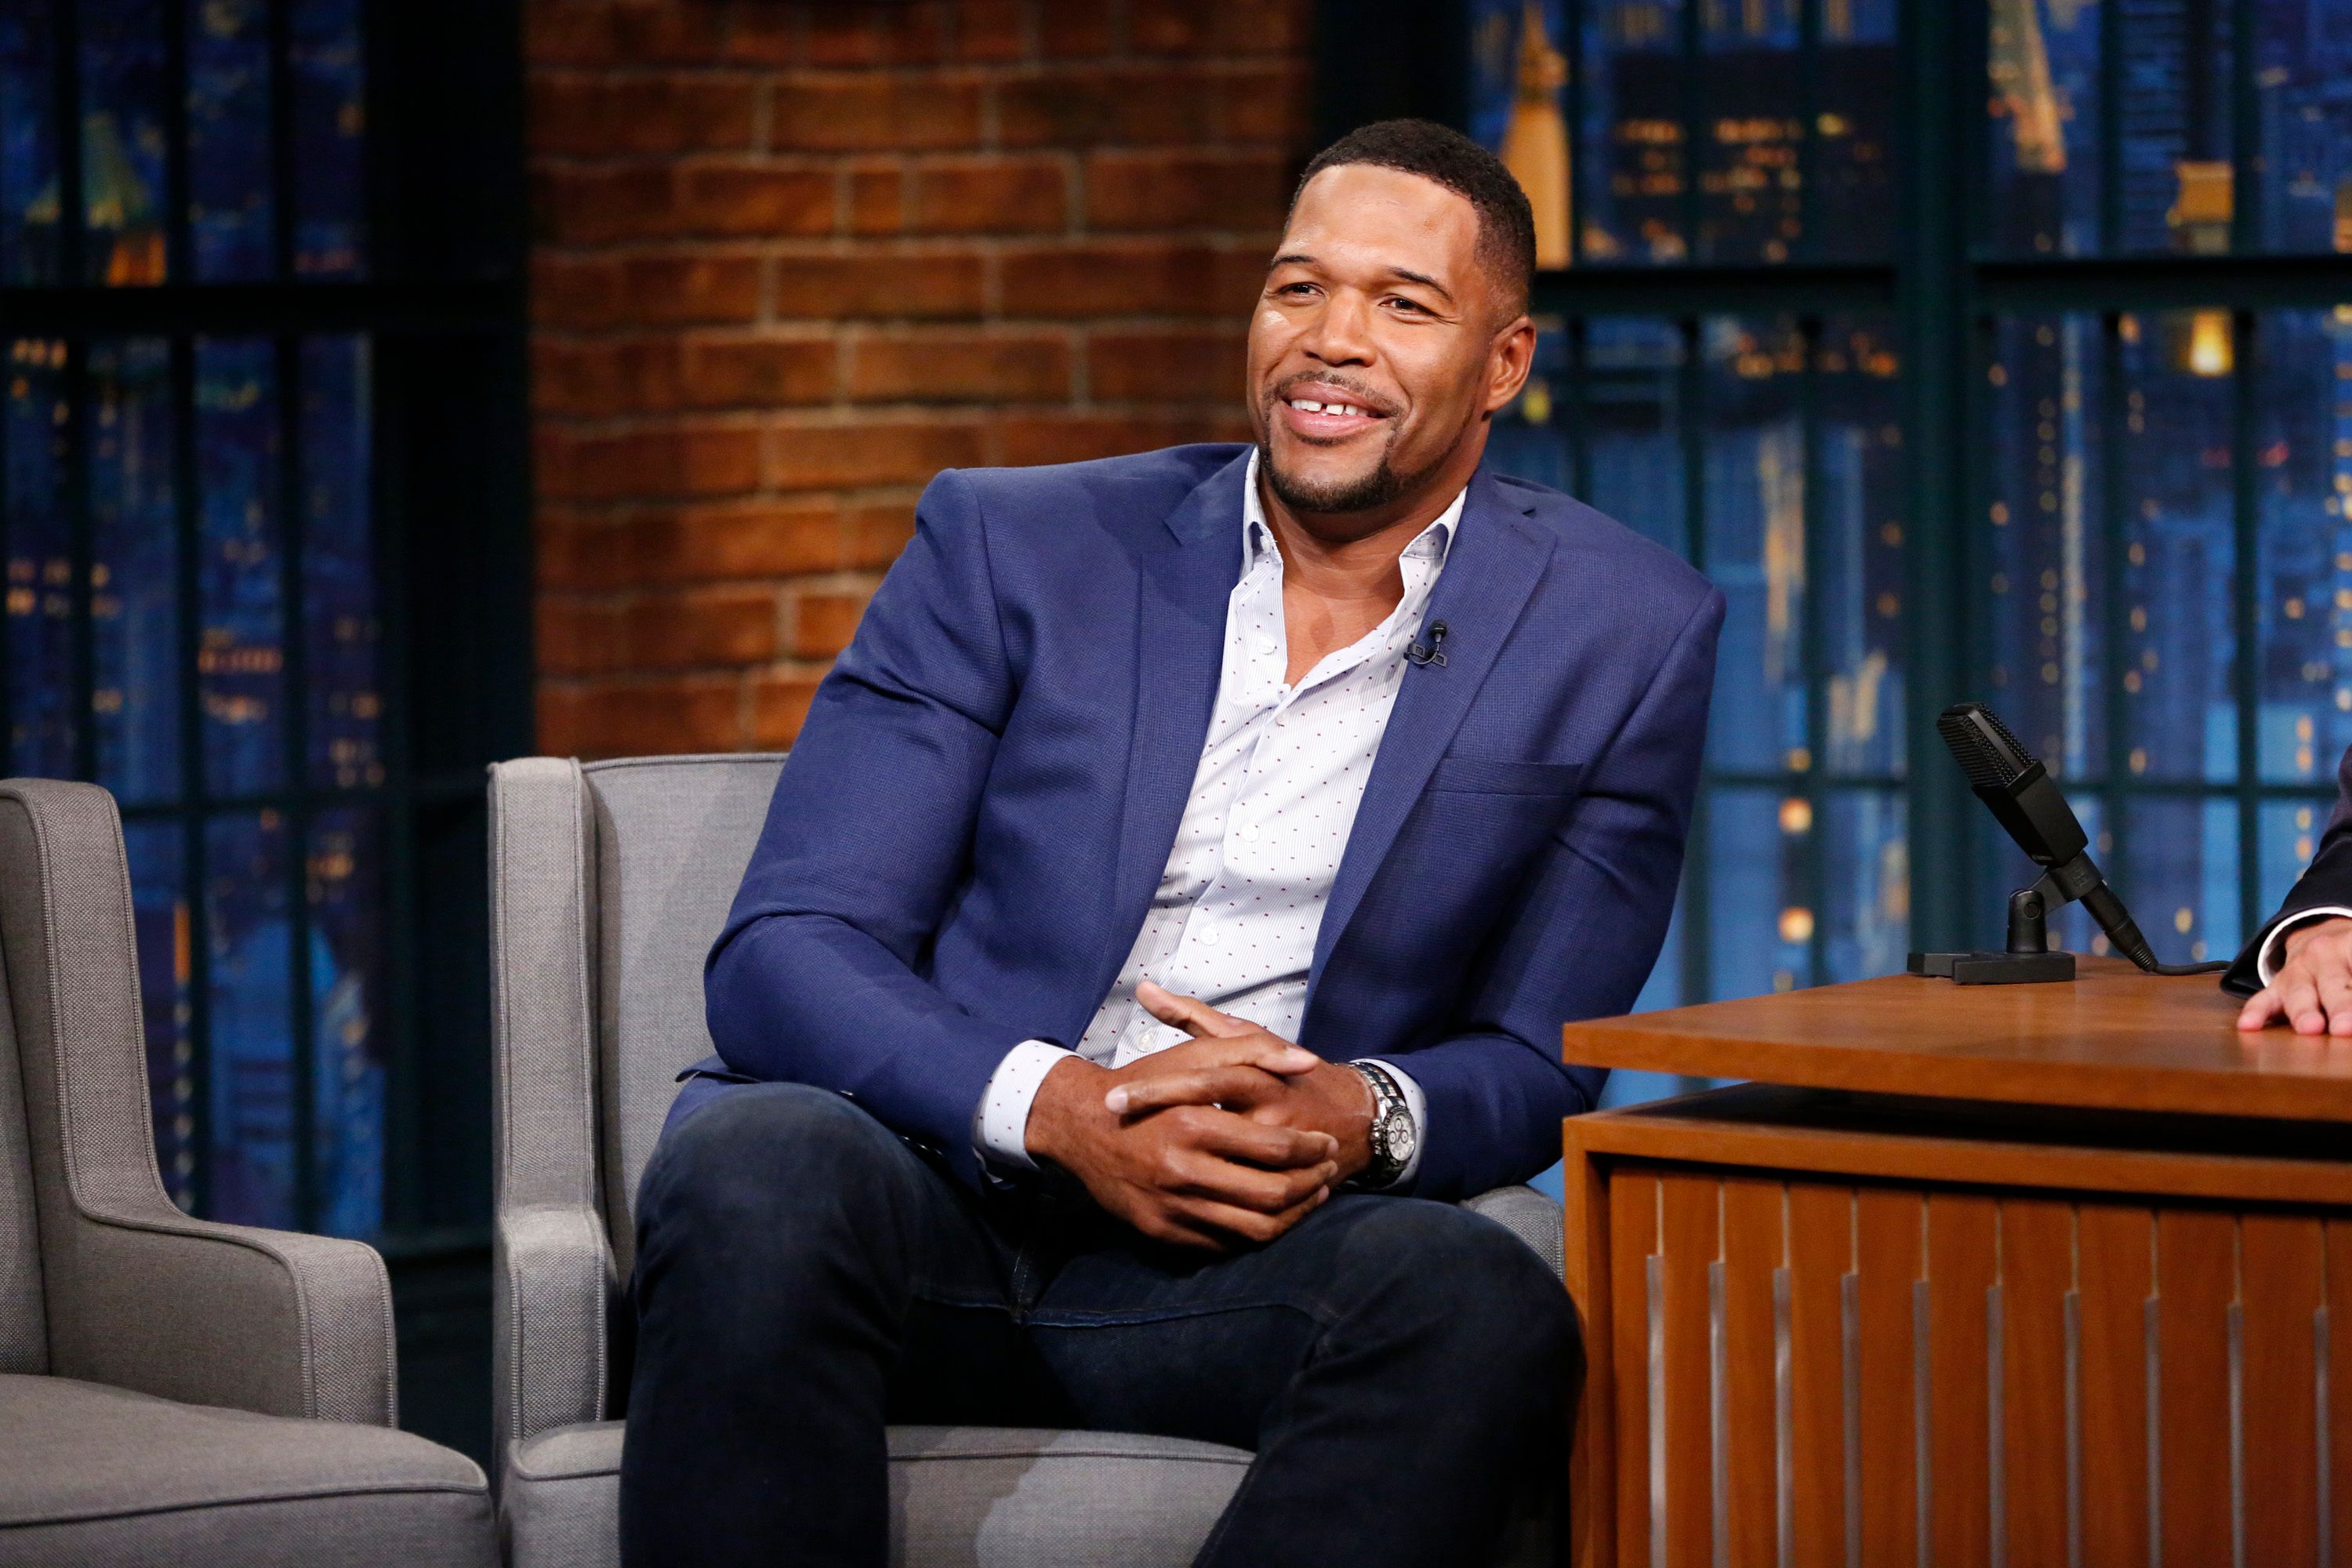 Michael Strahan during an interview on October 2, 2017 | Photo: Getty Images